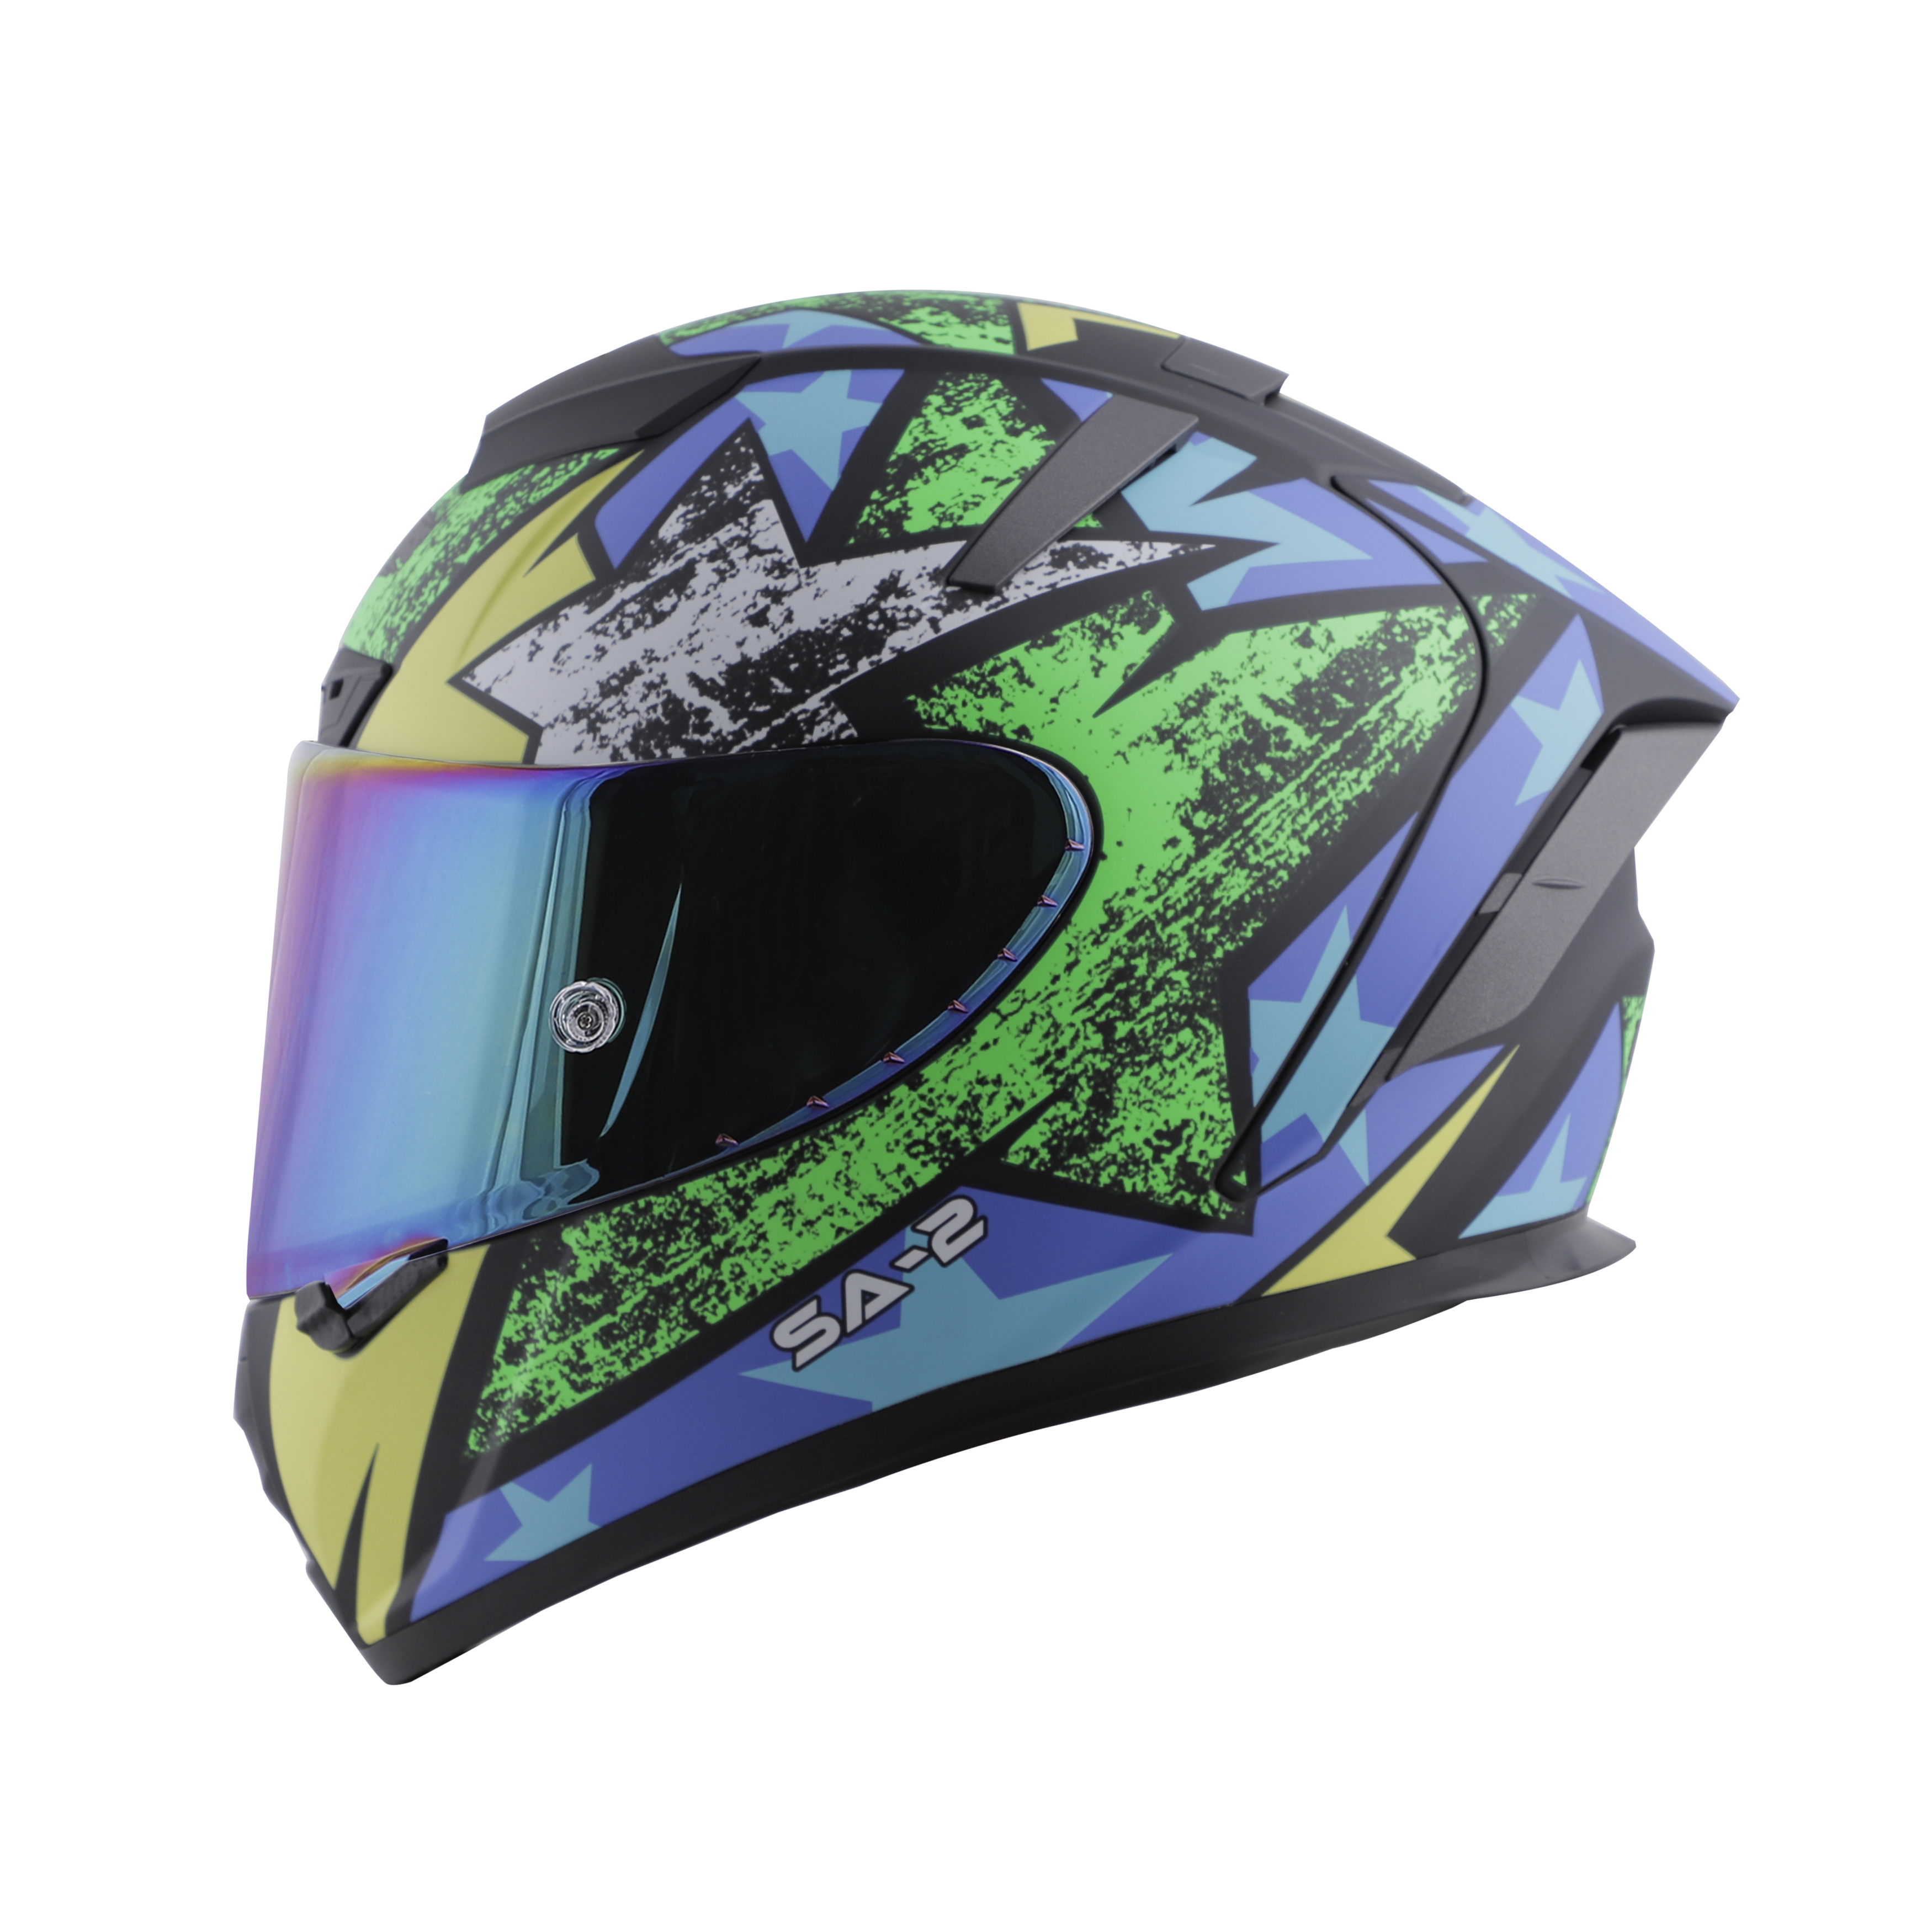 SA-2 STAR MAT BLACK WITH GREEN FITTED WITH CLEAR VISOR EXTRA  CHROME RAINBOW VISOR FREE (WITH ANTI-FOG SHIELD HOLDER)